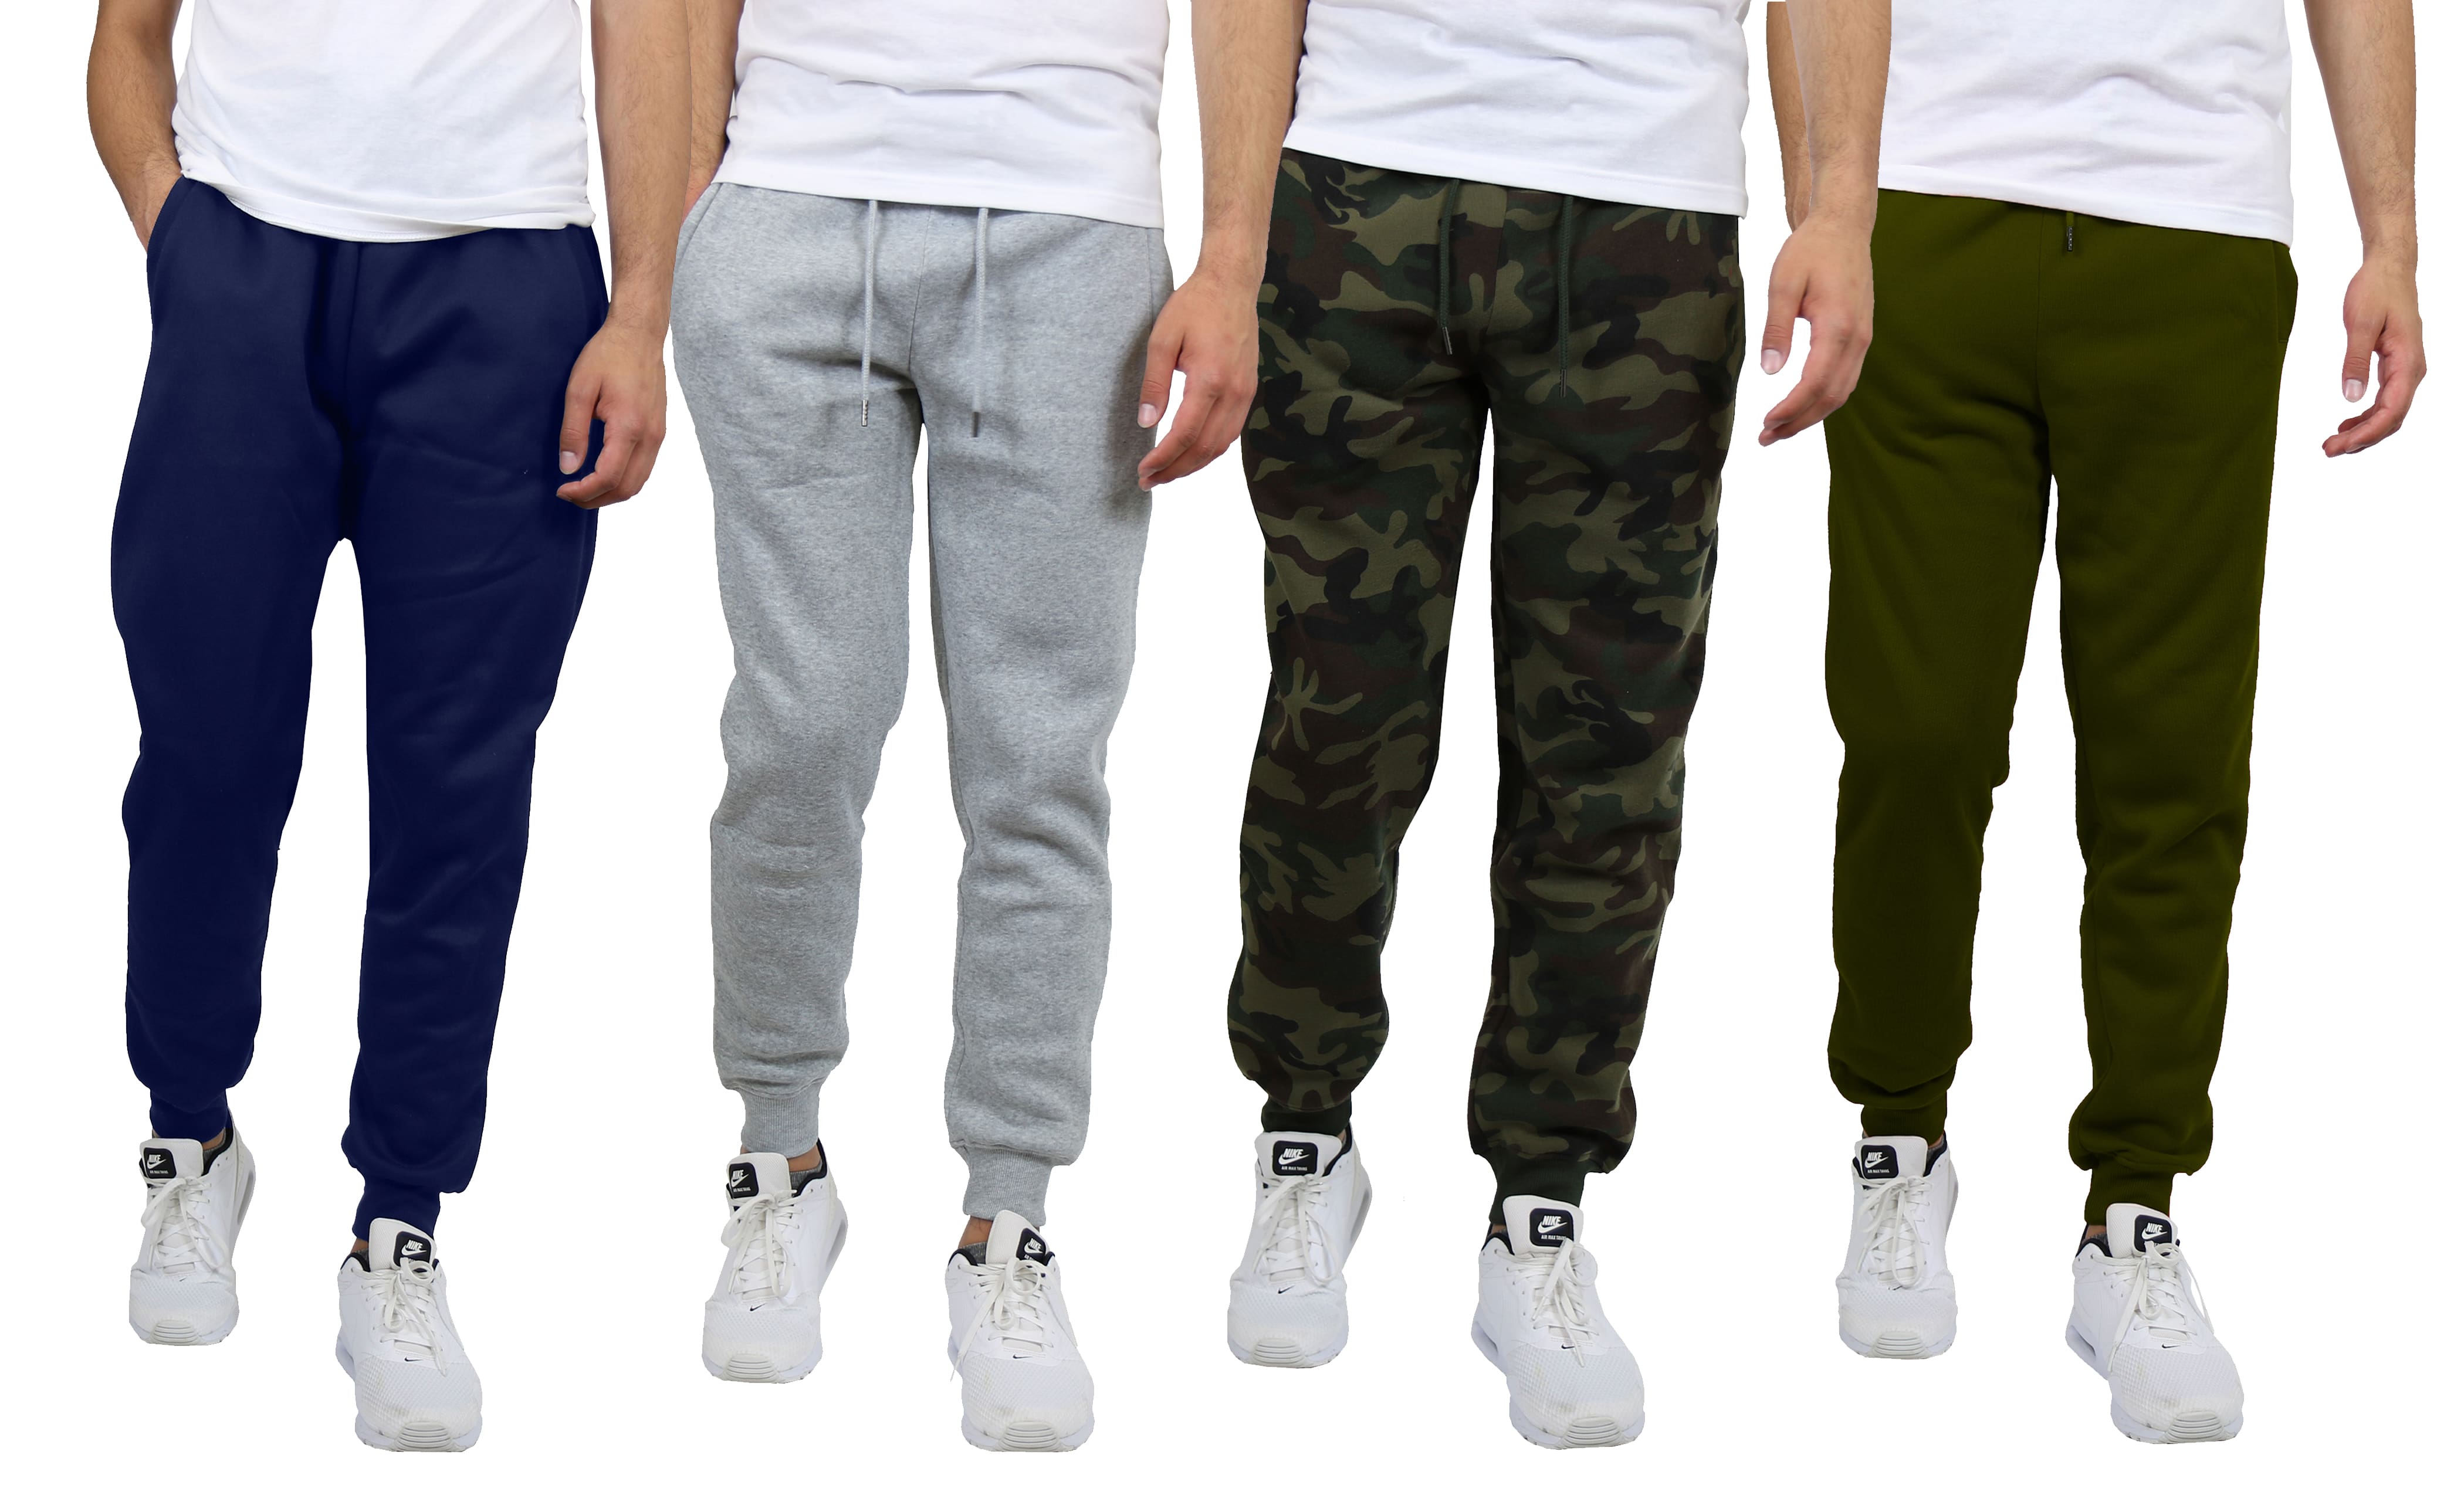 Galaxy by Harvic Men's Fleece-Lined Jogger Sweatpants 4 Pack | Bottoms ...